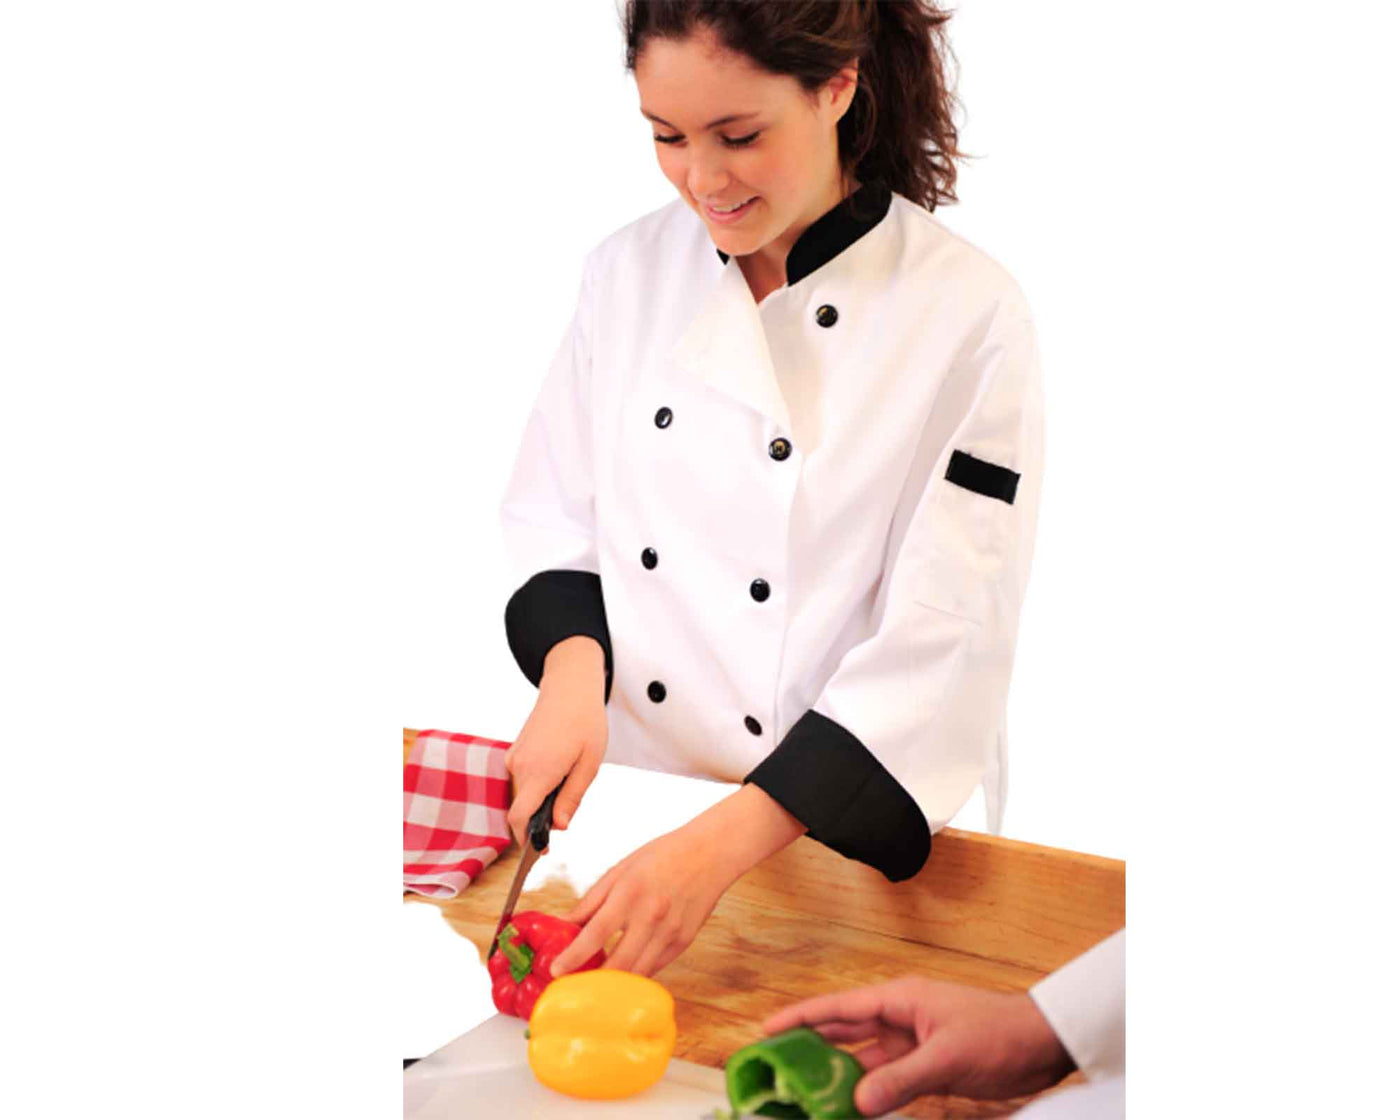 Woman wearing a chef coat and preparing food